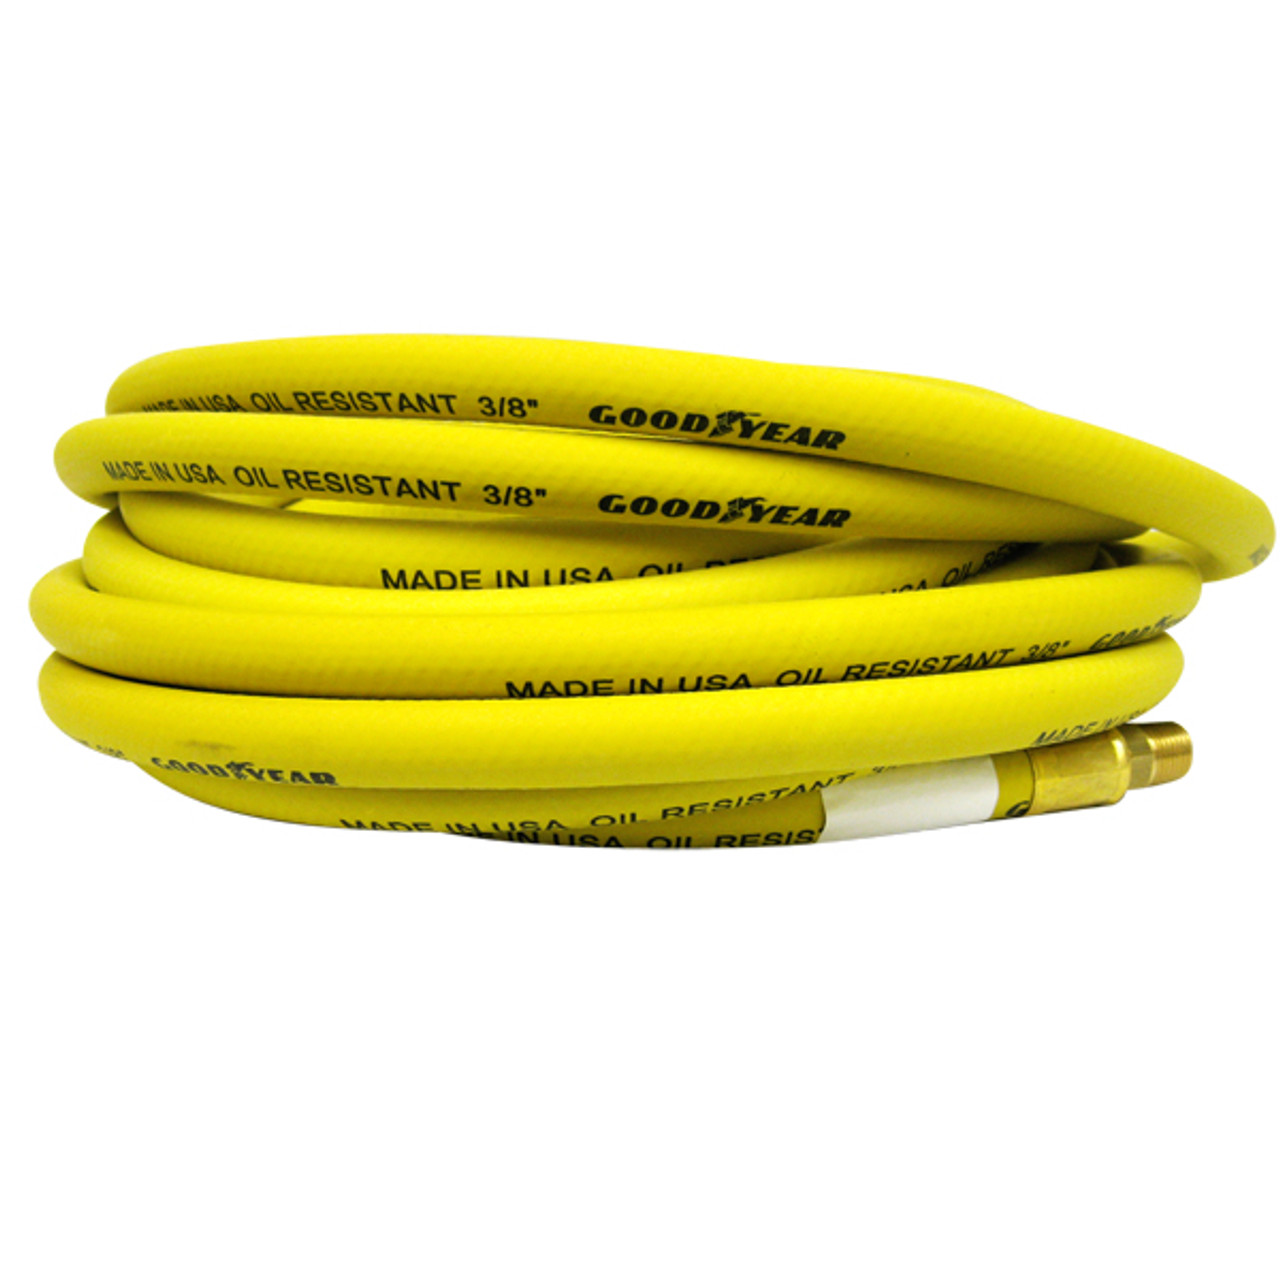 Continental 3/8-Inch x 50-Feet Safety Rubber Air Hose 1/4-Inch Fitting Ends, Yellow - Made in USA